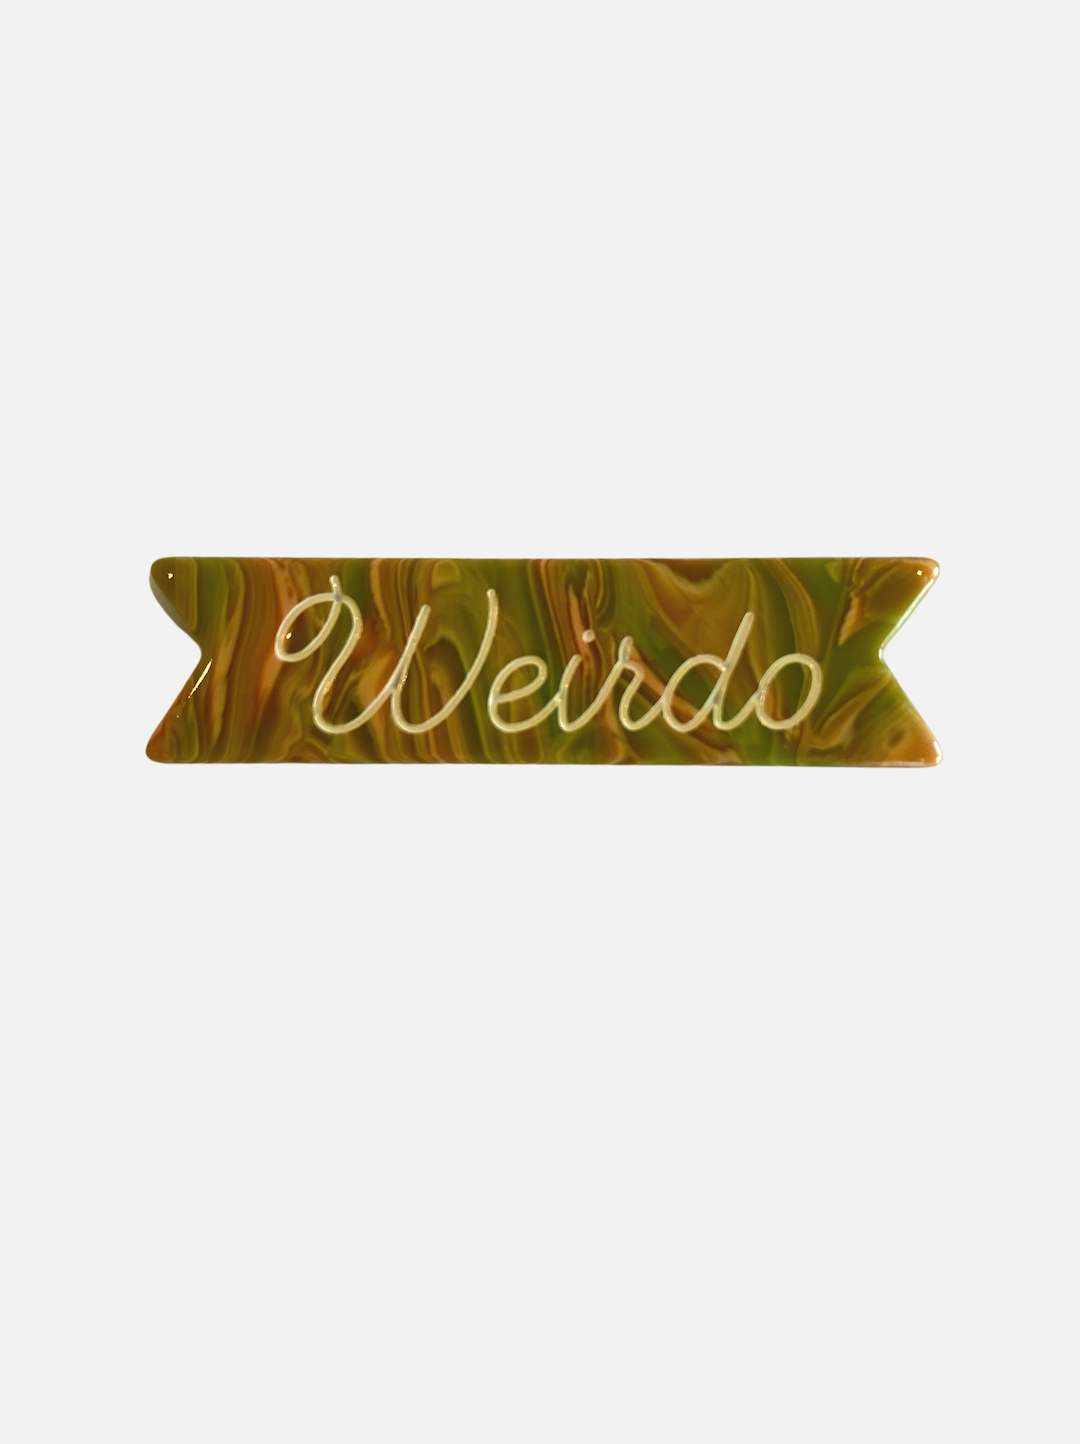 A kids' hair clip with the word Weirdo on a swirly green and orange background